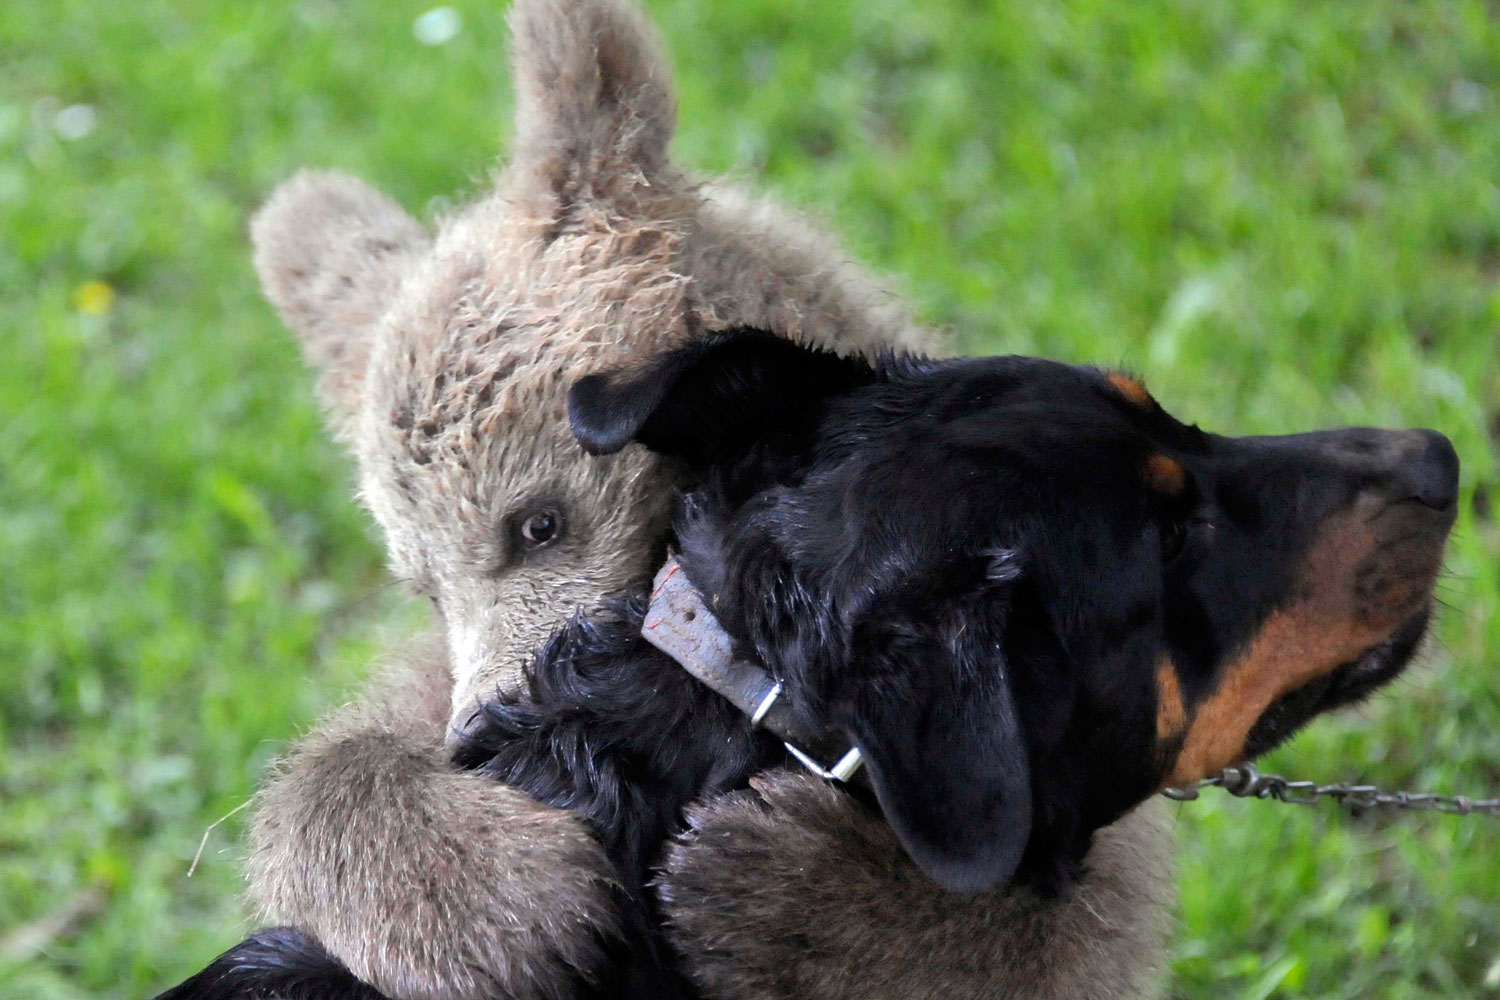 A brown bear (Ursus arctos) cub, Medo, plays with the Logar family dog in Podvrh village, central Slovenia. The Slovenian Logar family has adopted the three-and-half-month-old bear cub after it strolled into their yard. Although the family would like to prepare a fenced enclosure for it, veterinary authorities would prefer to move it into a shelter for wild animals.